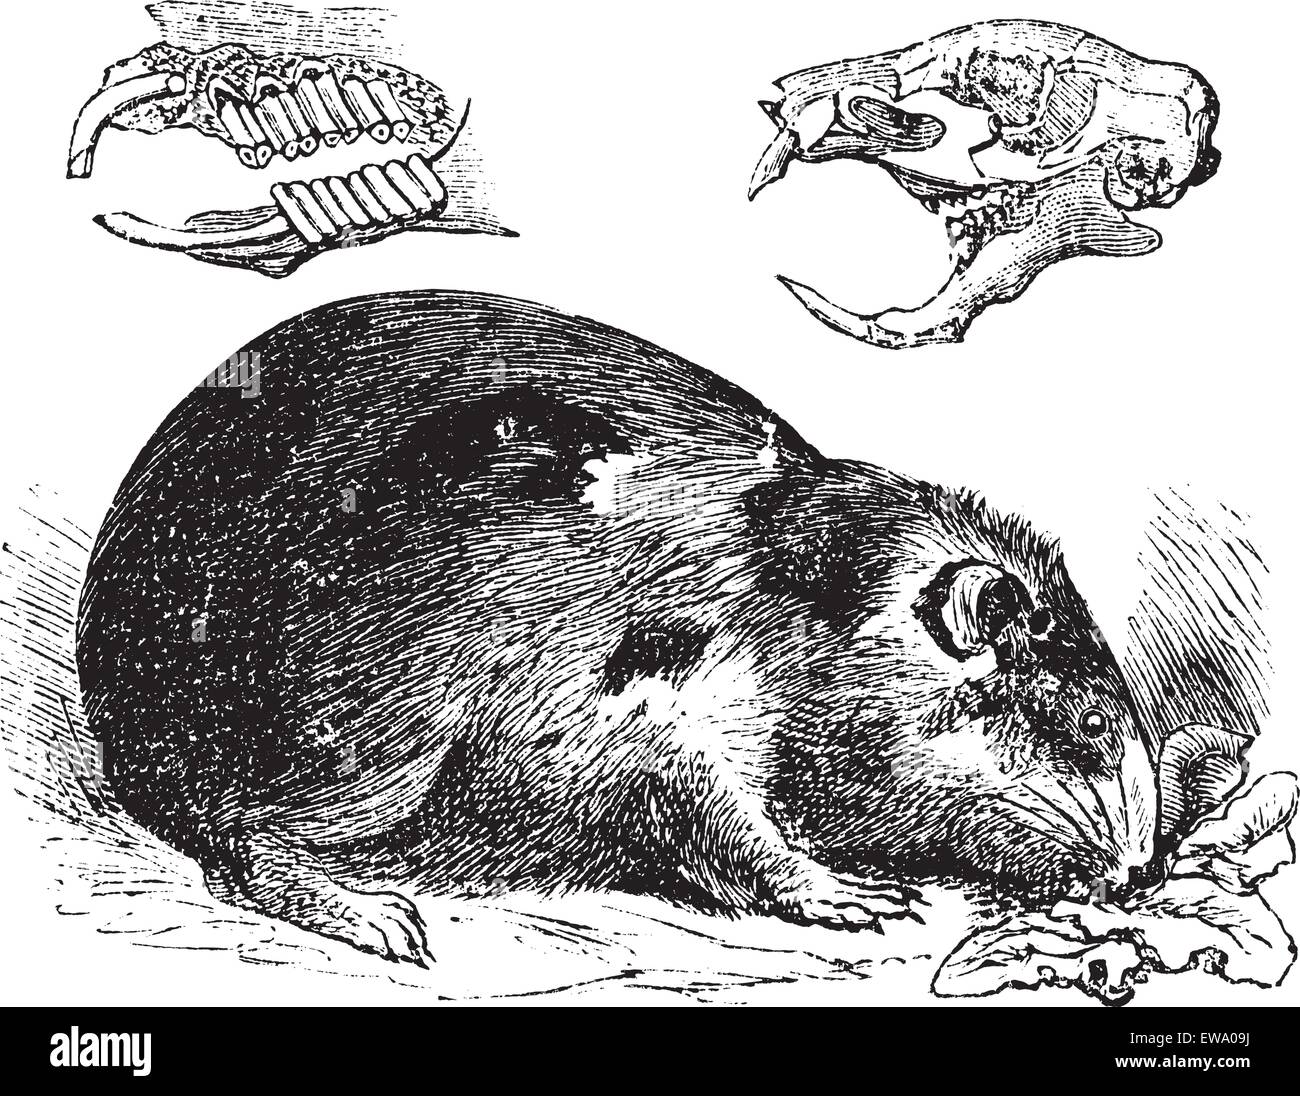 Guinea pig or Cavy or Cavia porcellus, vintage engraving. Old engraved illustration of a Guinea pig showing jaw bones and teeth (upper left) and skull bone (upper right). Stock Vector